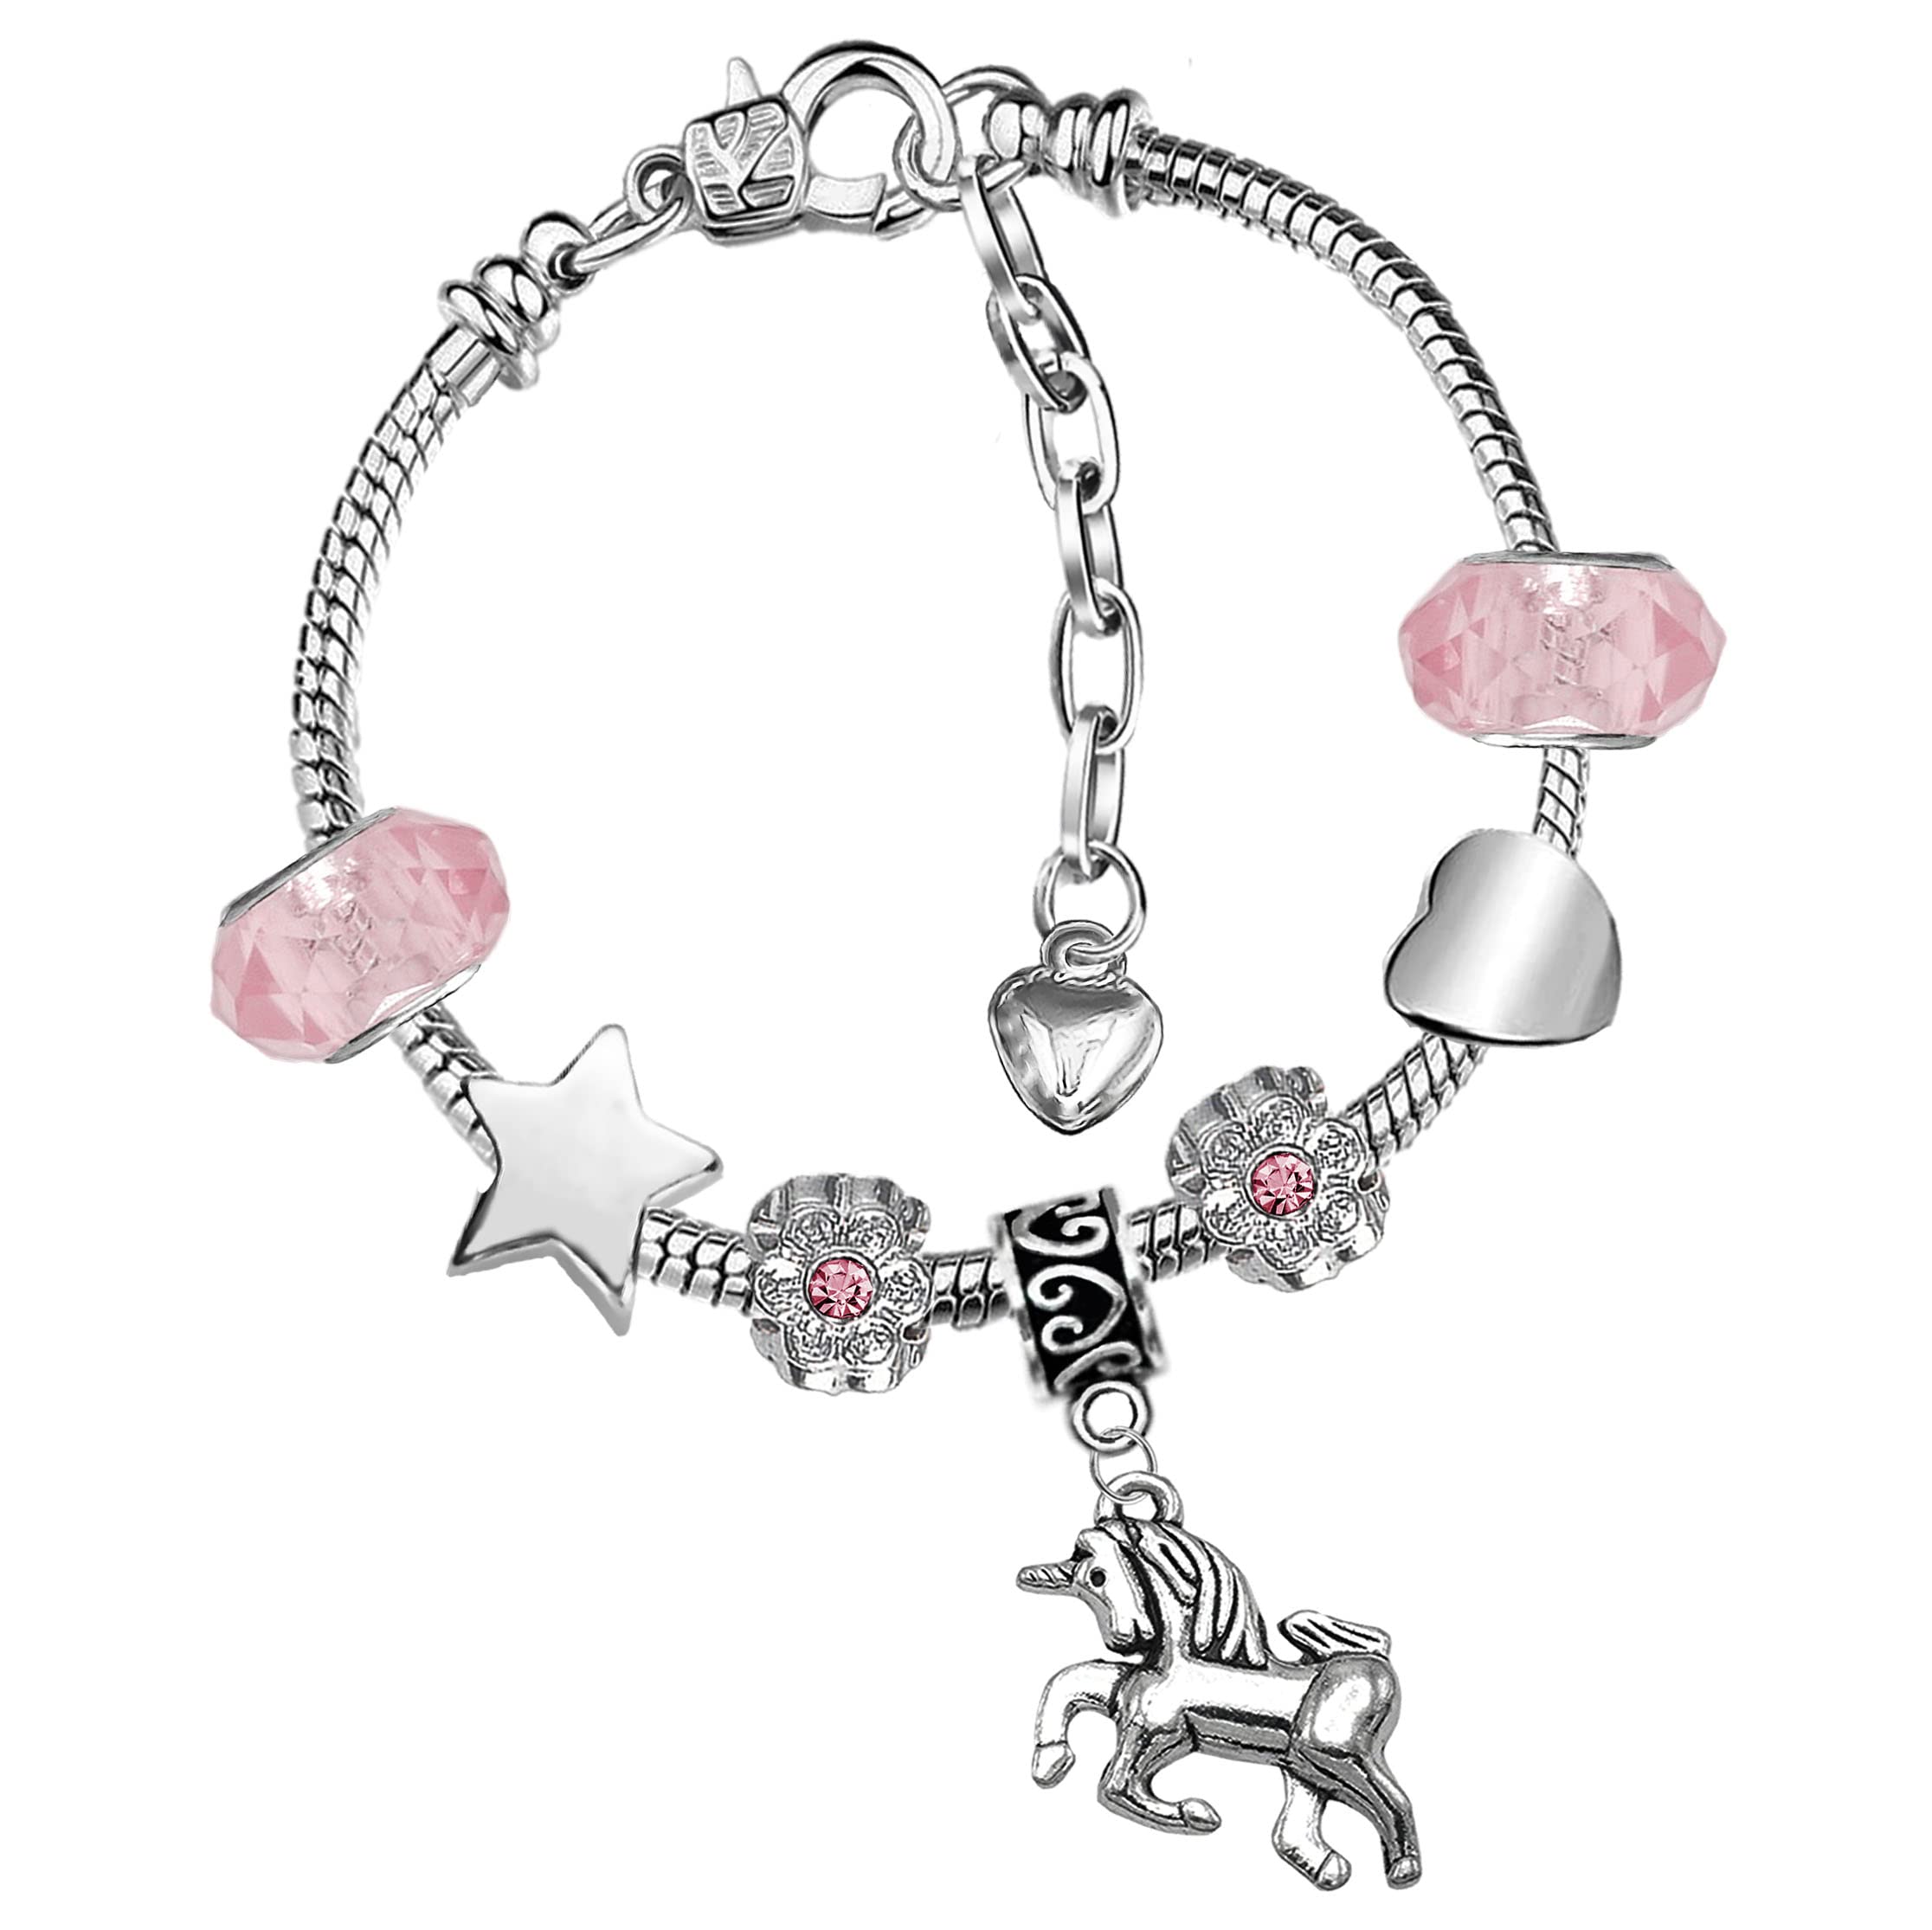 Girls Magical Unicorn Sparkly Crystal Silver Plated Charm Bracelet with Gift Box Set Birthday Gifts and Birthday Jewellery for Girls